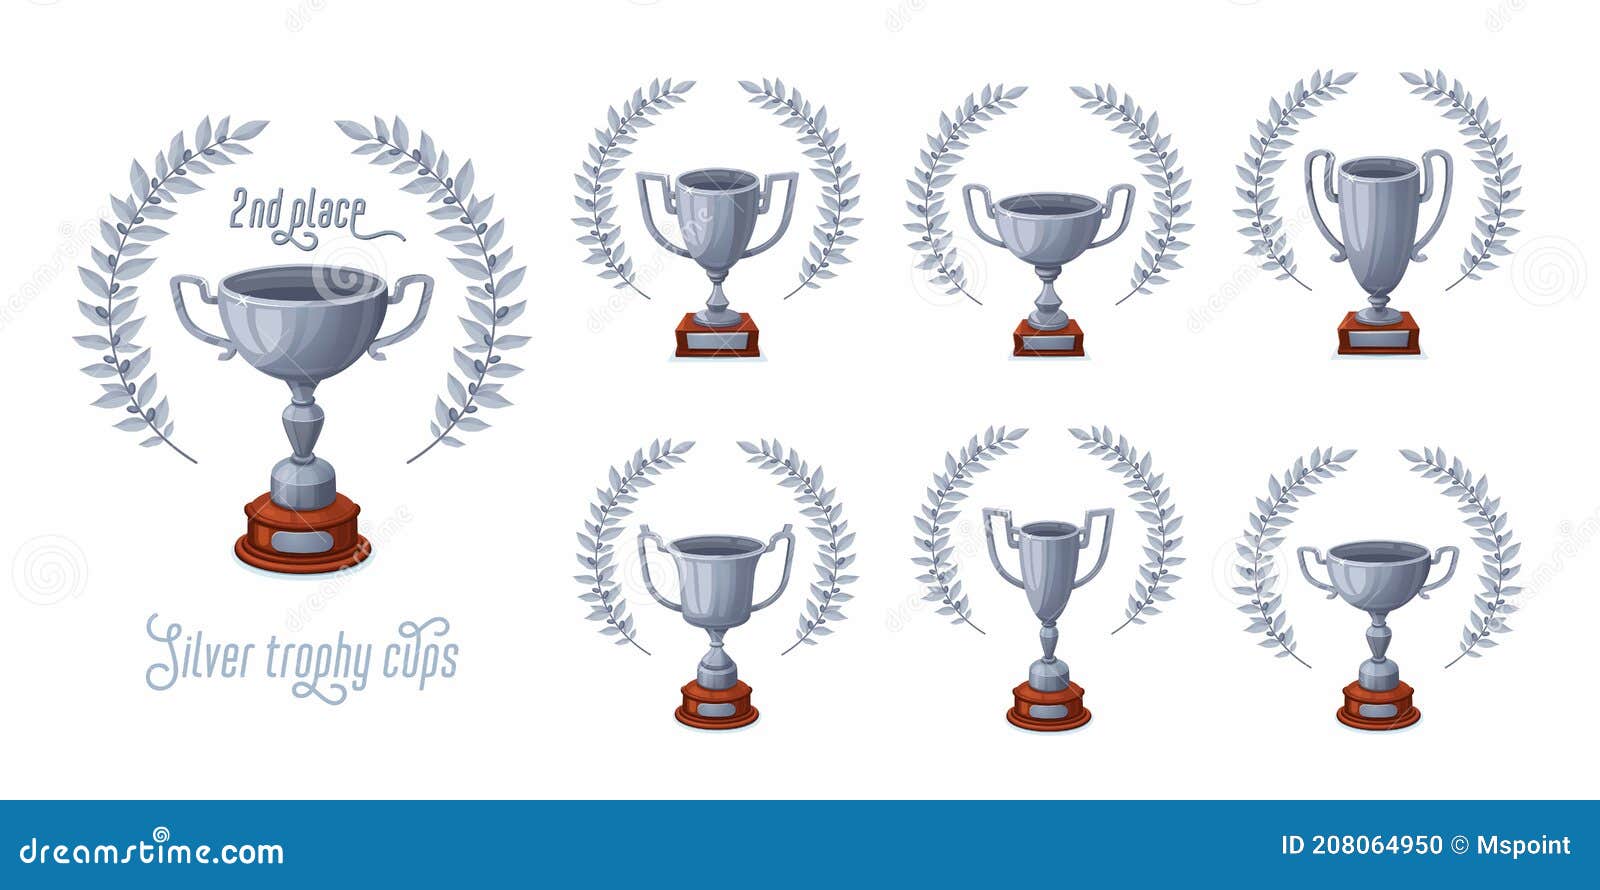 Silver Trophy Cups with Laurel Wreaths. Trophy Award Cups Set with  Different Shapes - 2nd Place Winner Trophies Stock Illustration -  Illustration of winner, design: 208064950